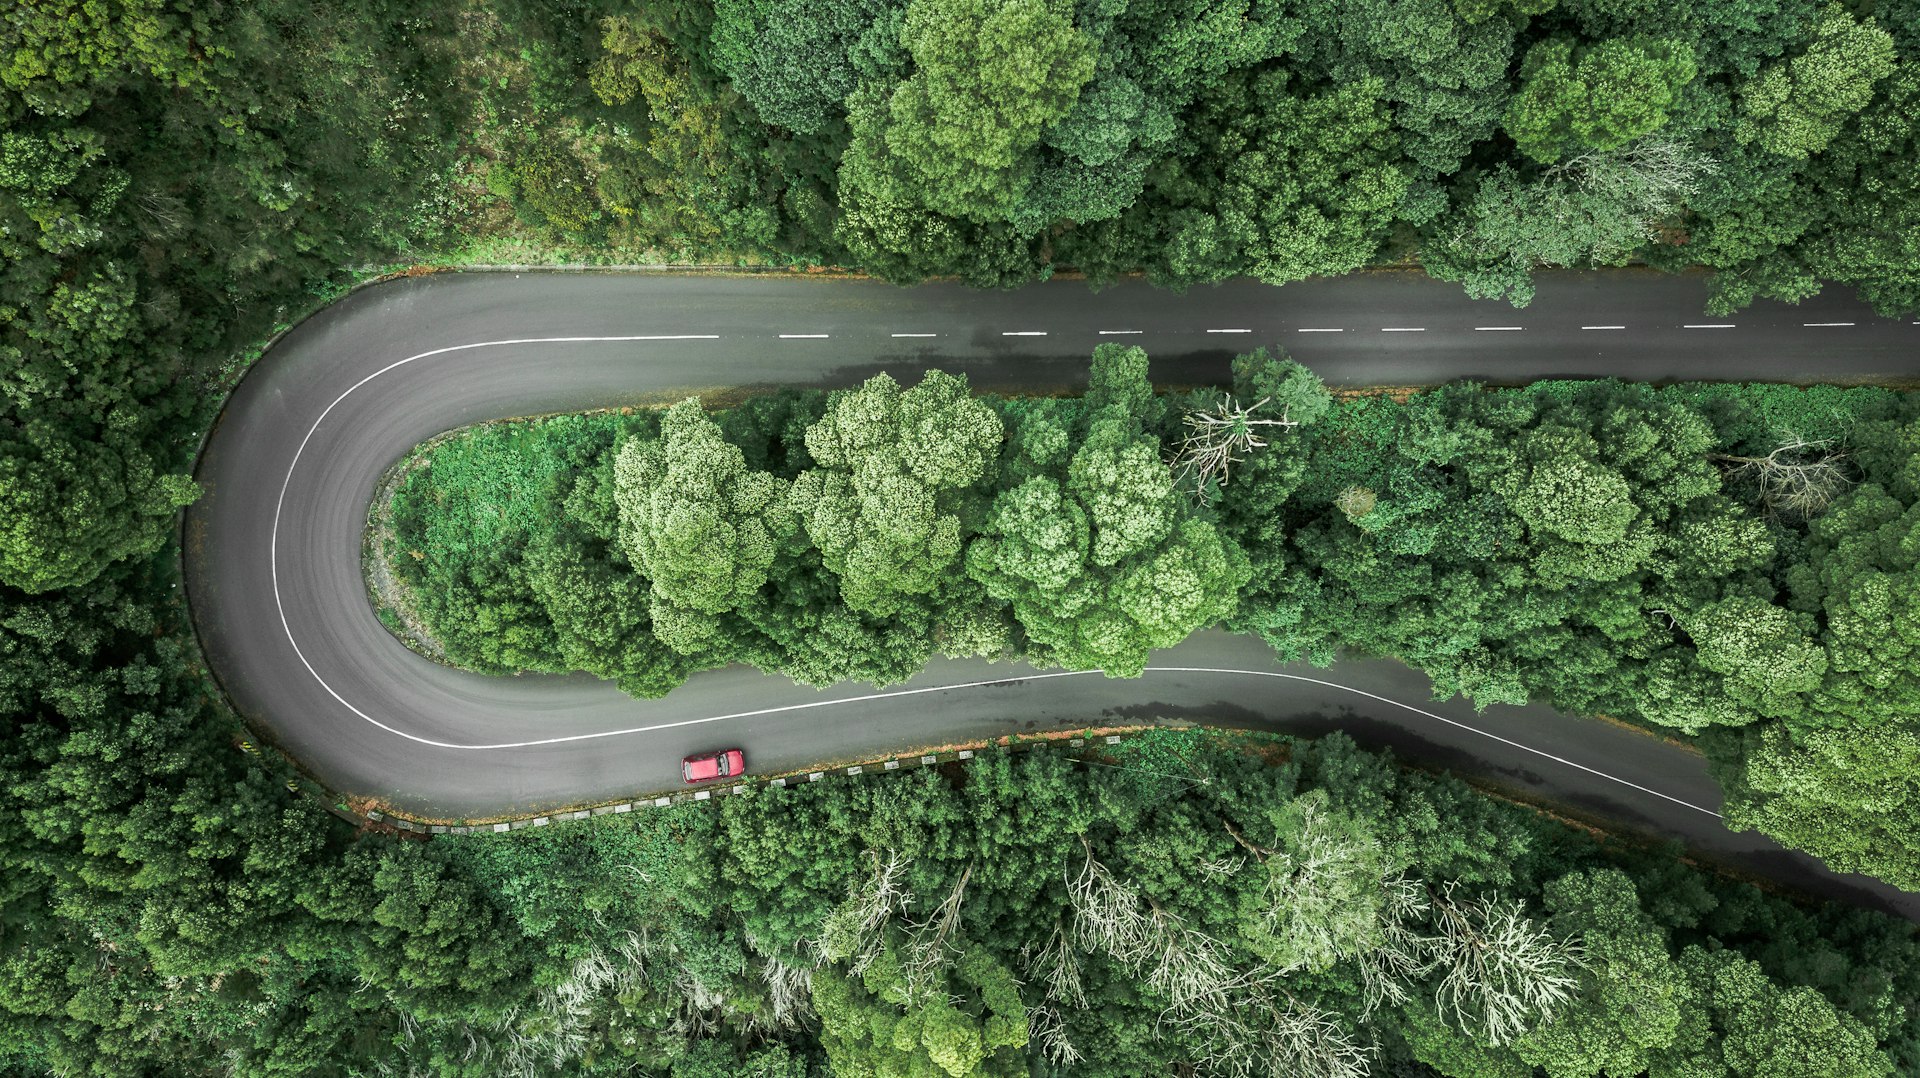 An aerial view of car driving on heavily curved road through a wooded mountain in Encumeada, Ribeira Brava, Madeira, Portugal